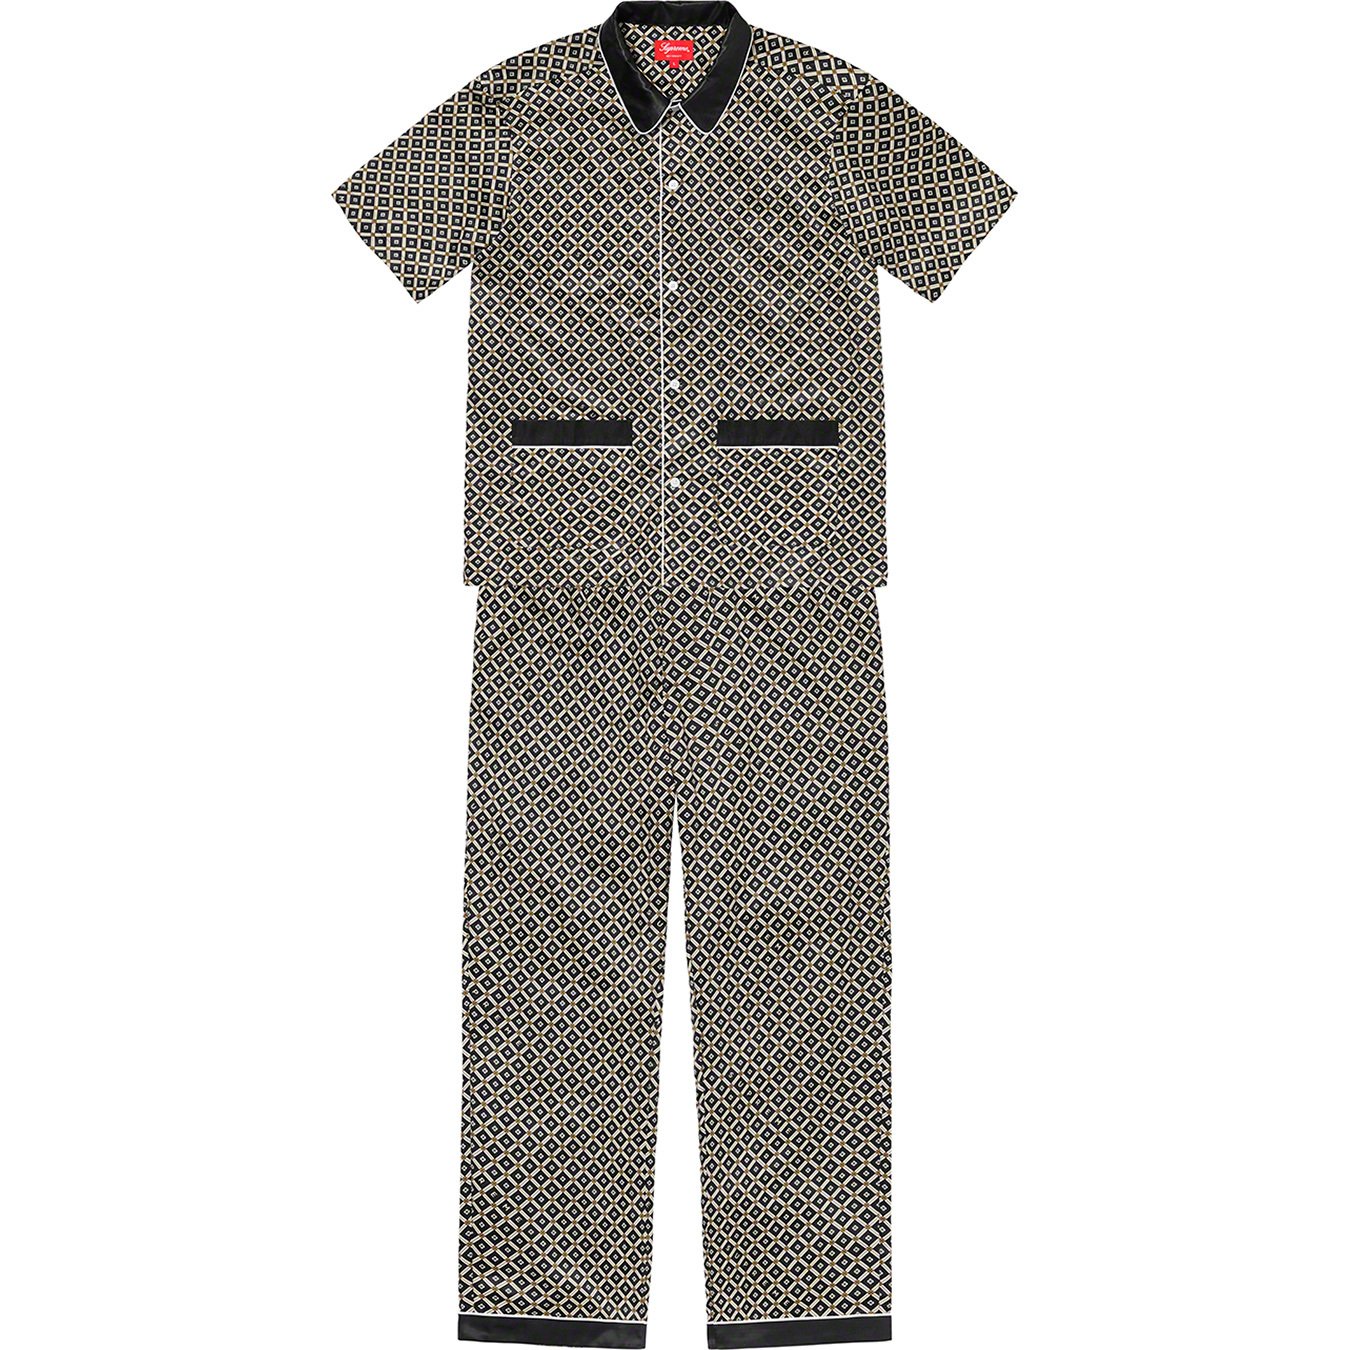 Supreme Pajama Set – Not Your Father's Gear